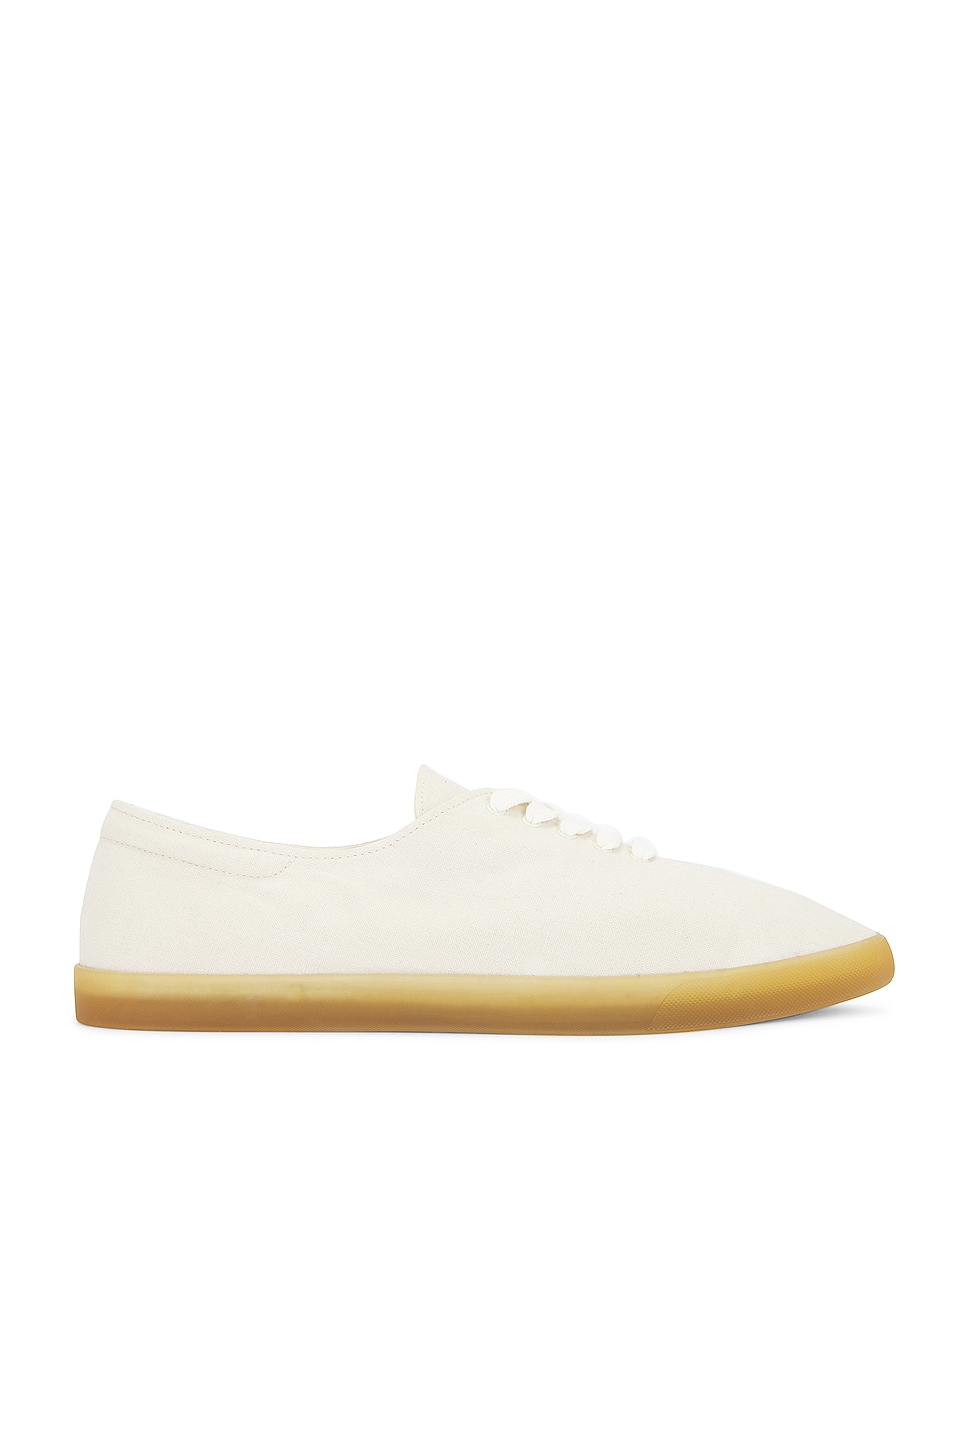 Image 1 of The Row Sneaker in Sand & Honey